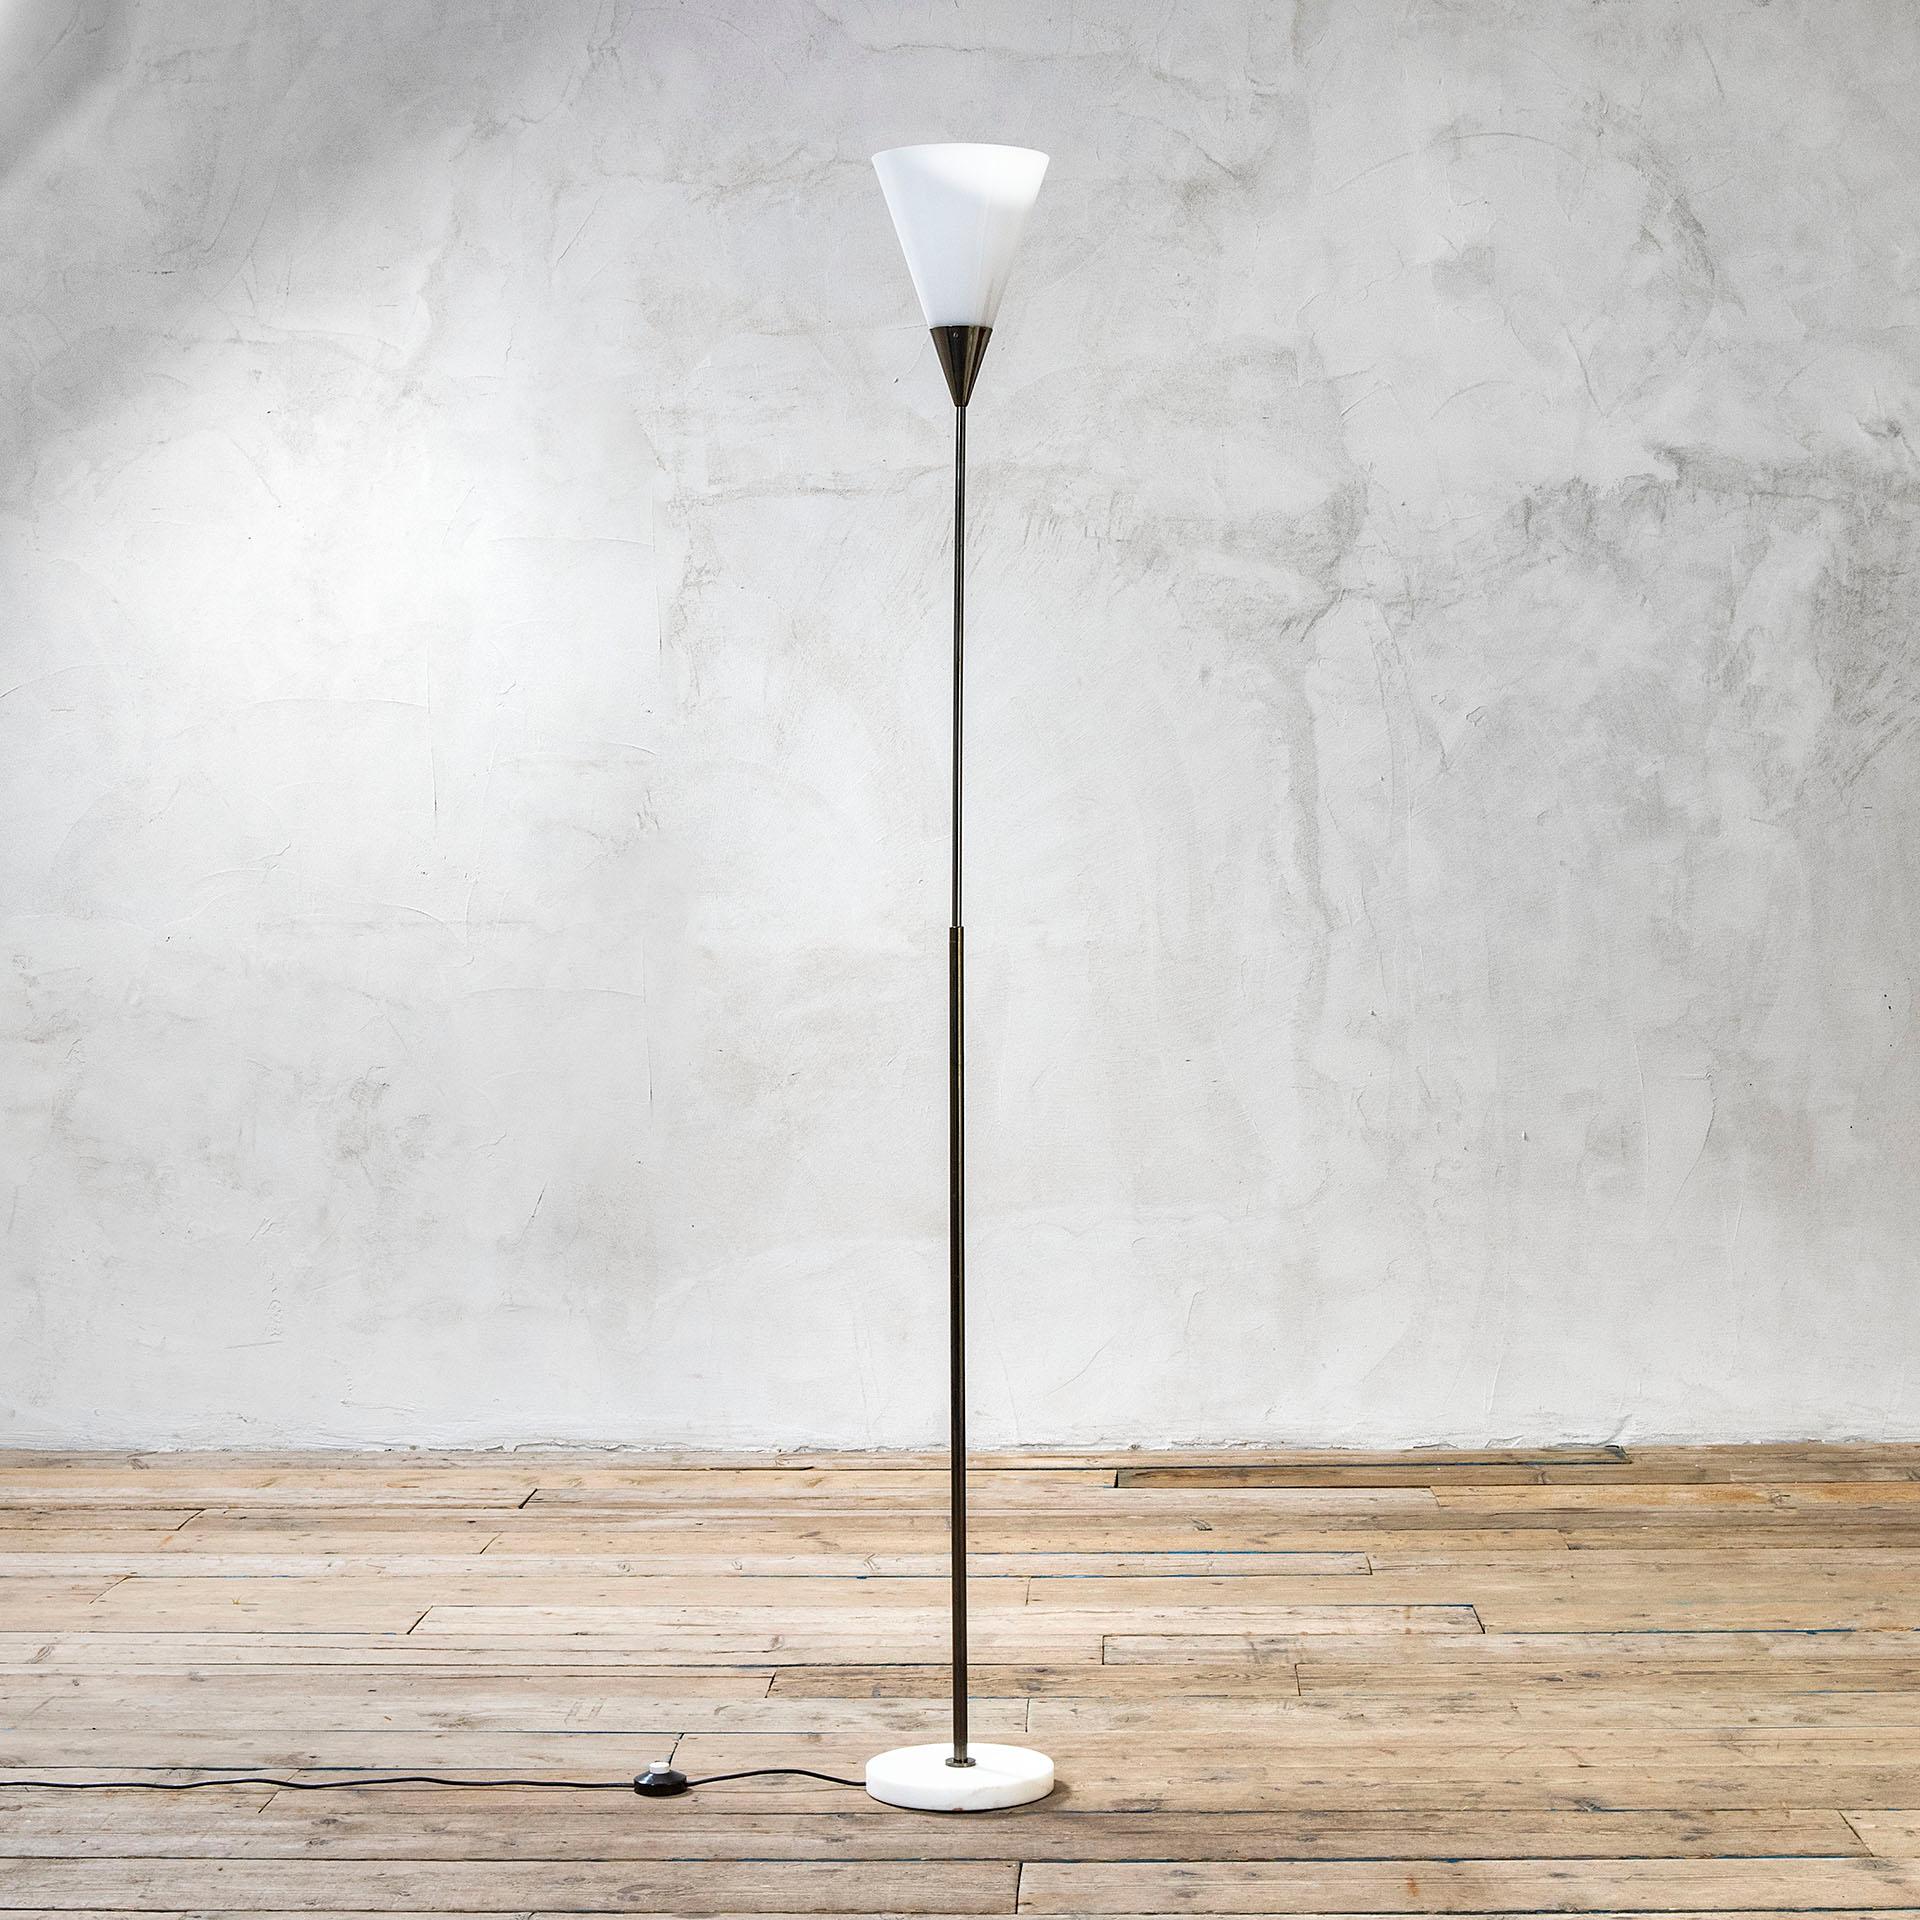 Founded in 1945 by Giuseppe Ostuni, Oluce is, in the field of lighting, the oldest Italian design company still active, a unique manufacturing excellence that translates into form passionate aesthetic and technological research into the potential of